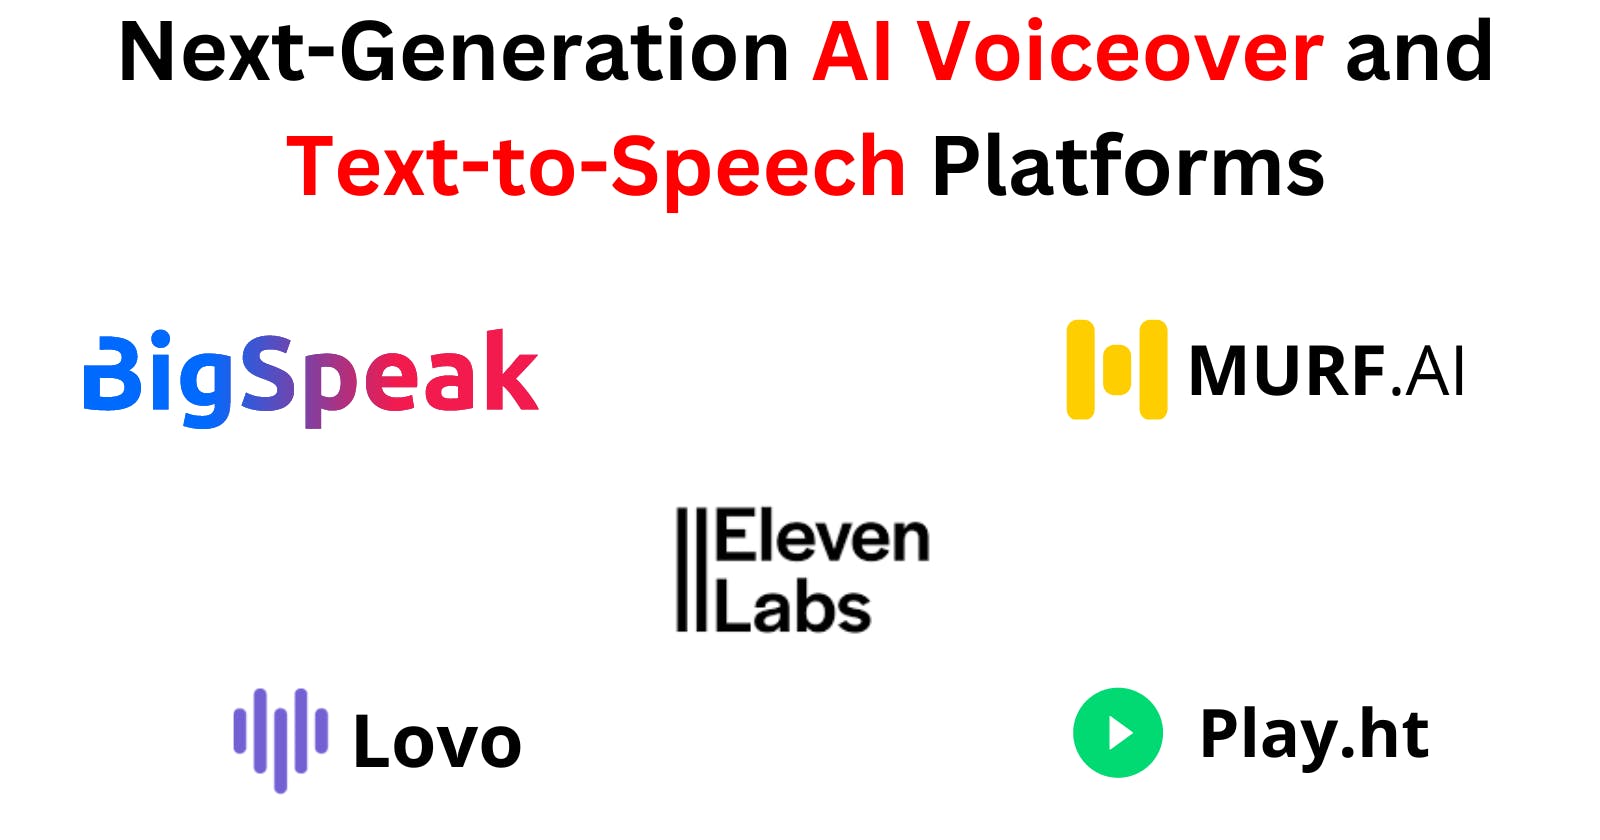 The Ultimate Guide to Next-Generation AI Voiceover and Text-to-Speech Platforms